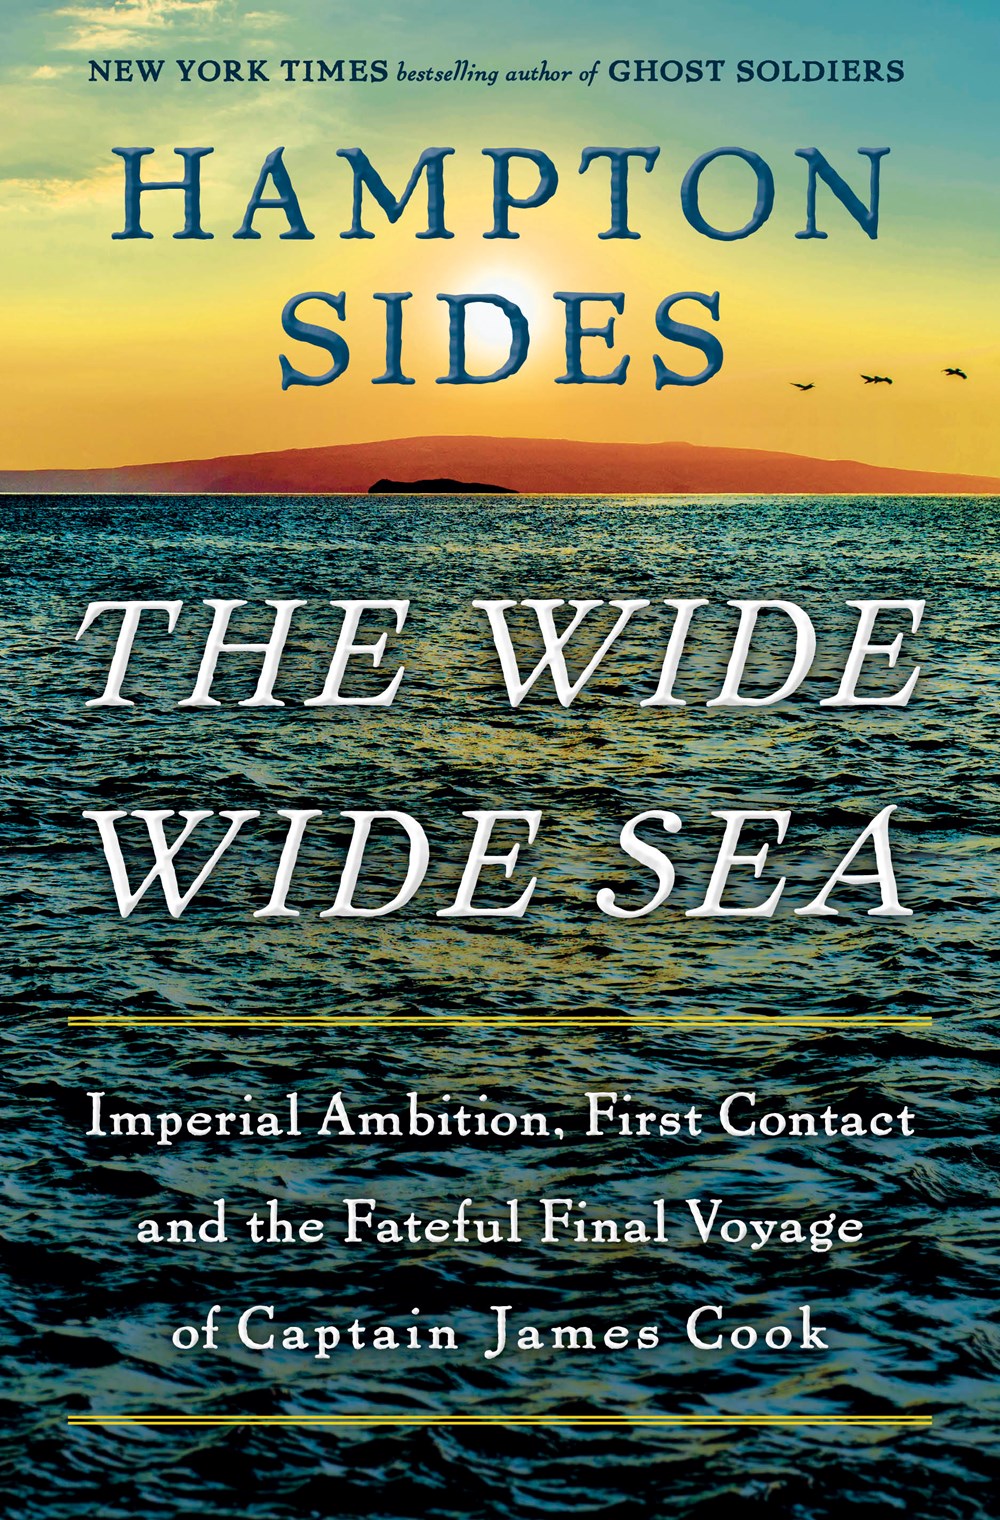 The Wide Wide Sea: Imperial Ambition, First Contact and the Fateful Final Voyage of Captain James Cook by Hampton Sides (4/16/24)